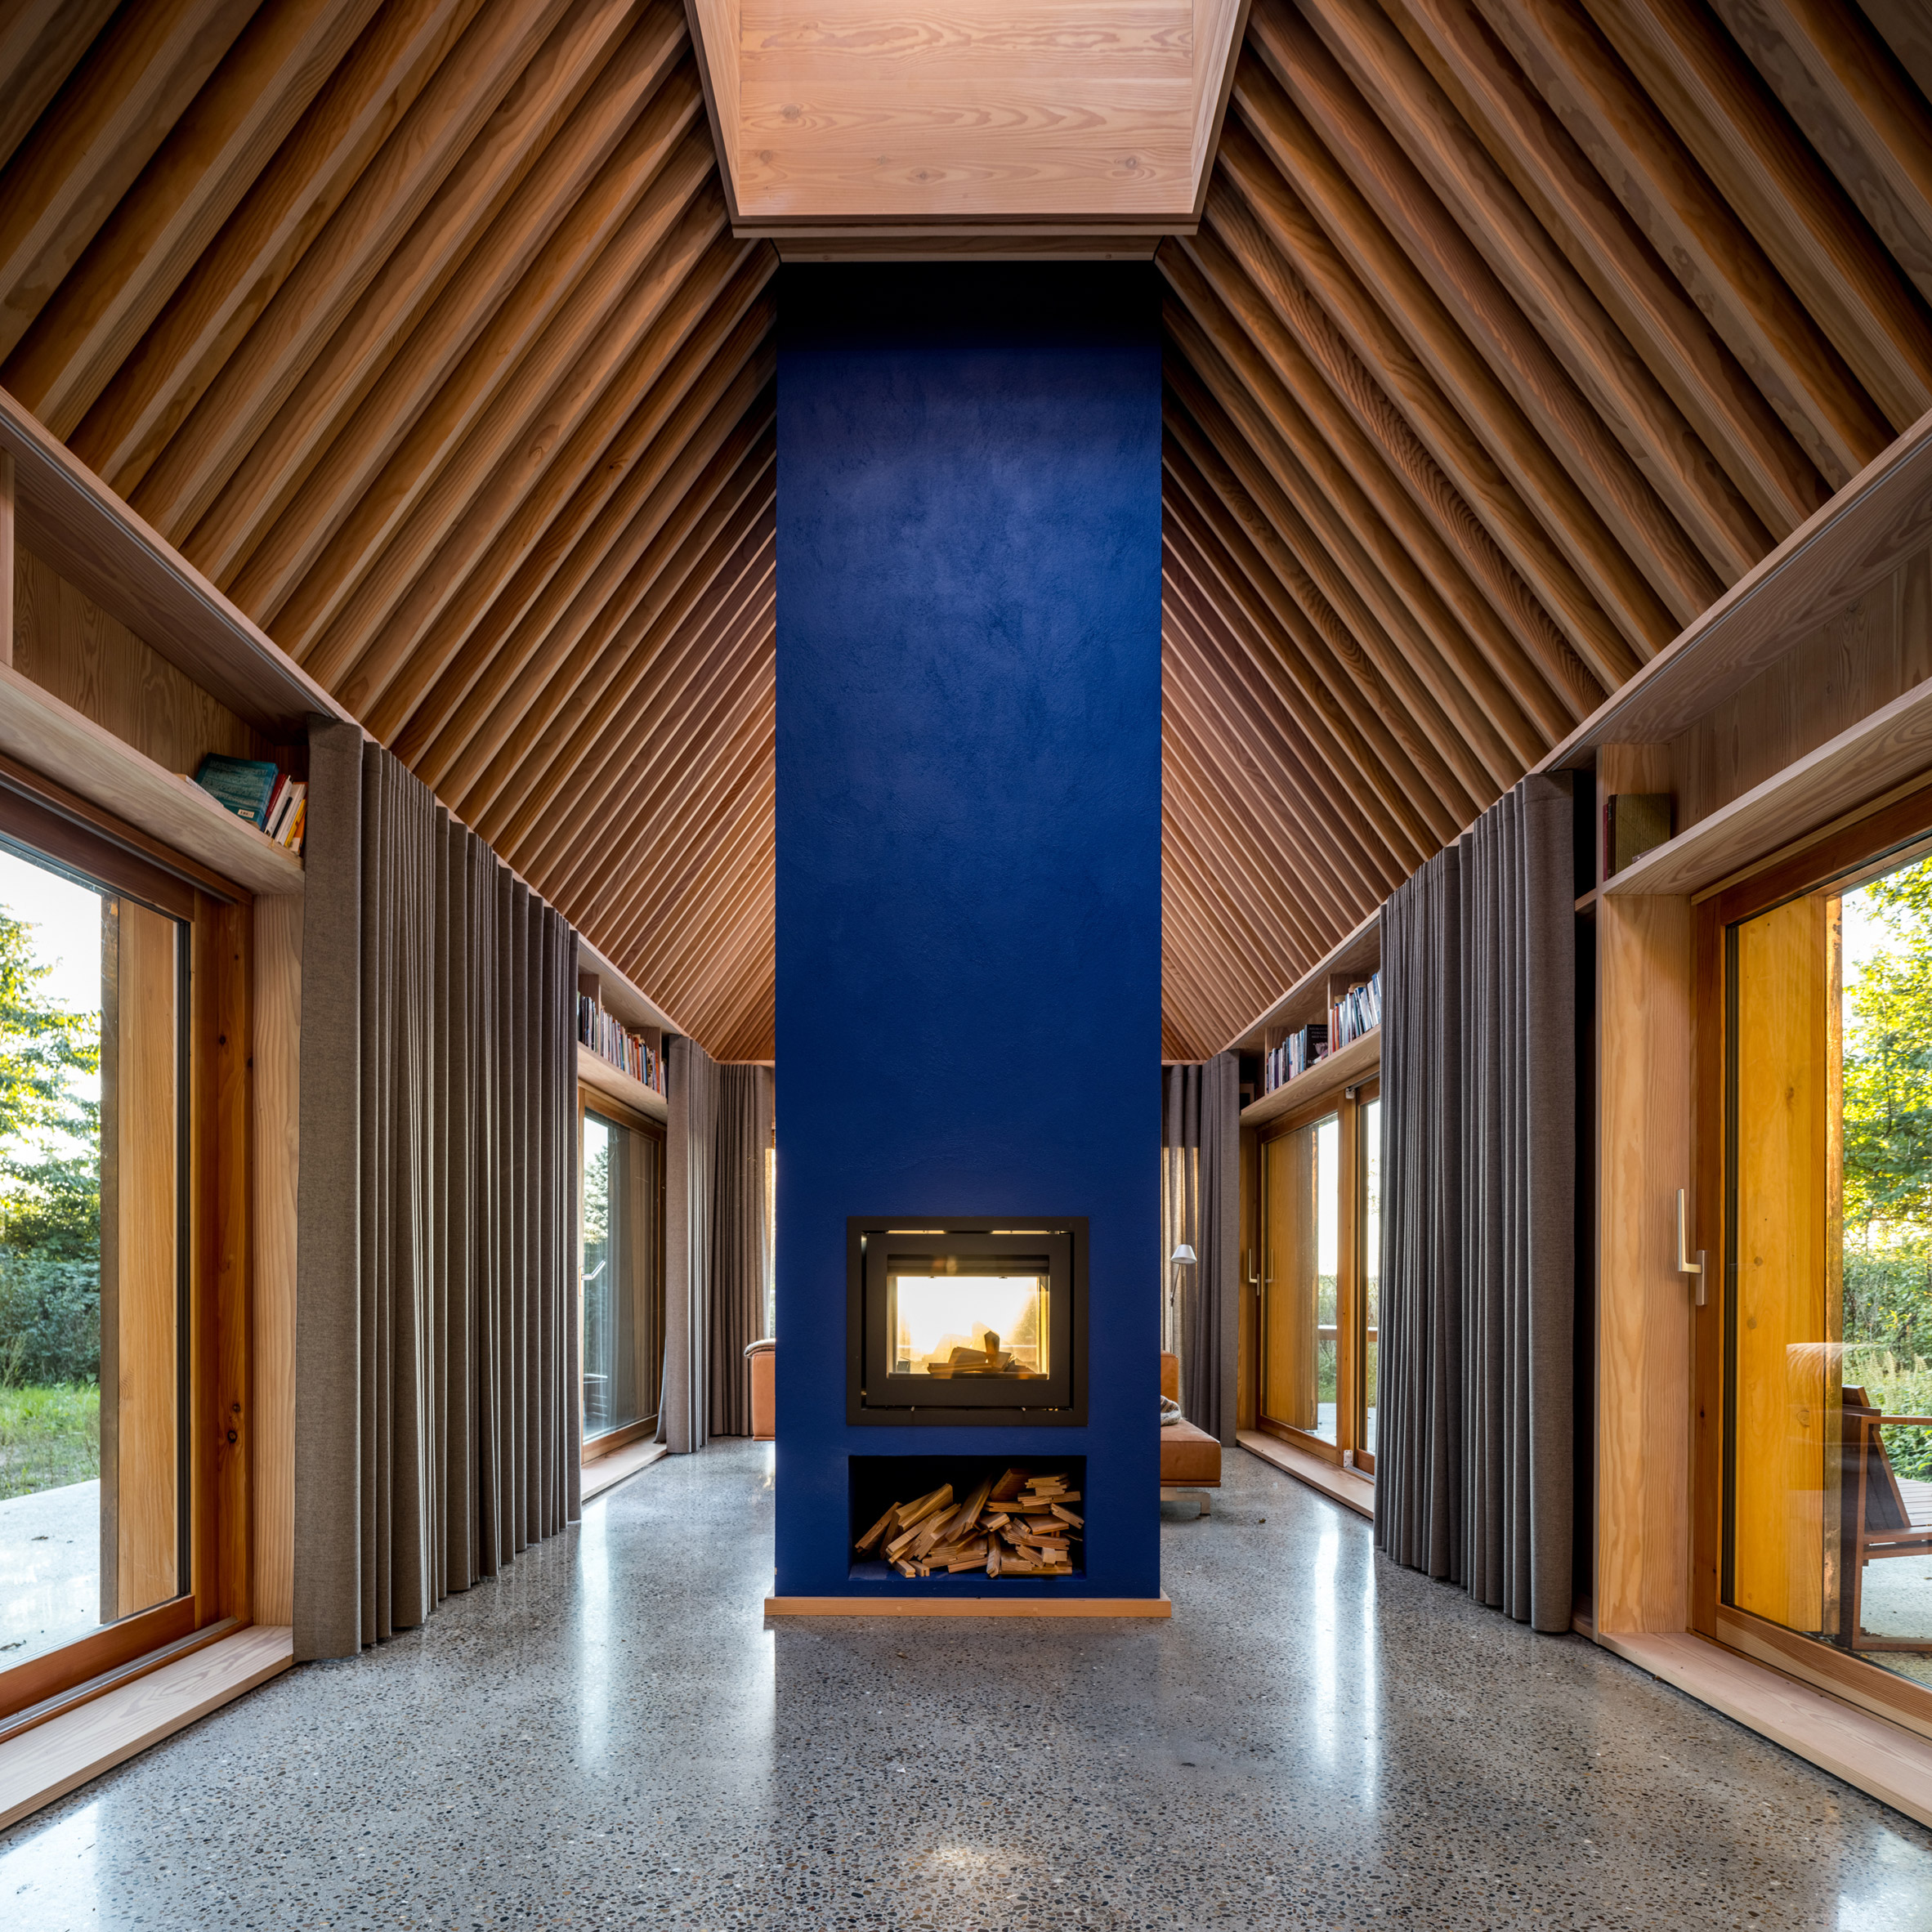 Blue hearth and timber ceiling beams inside The Author's House by Sleth